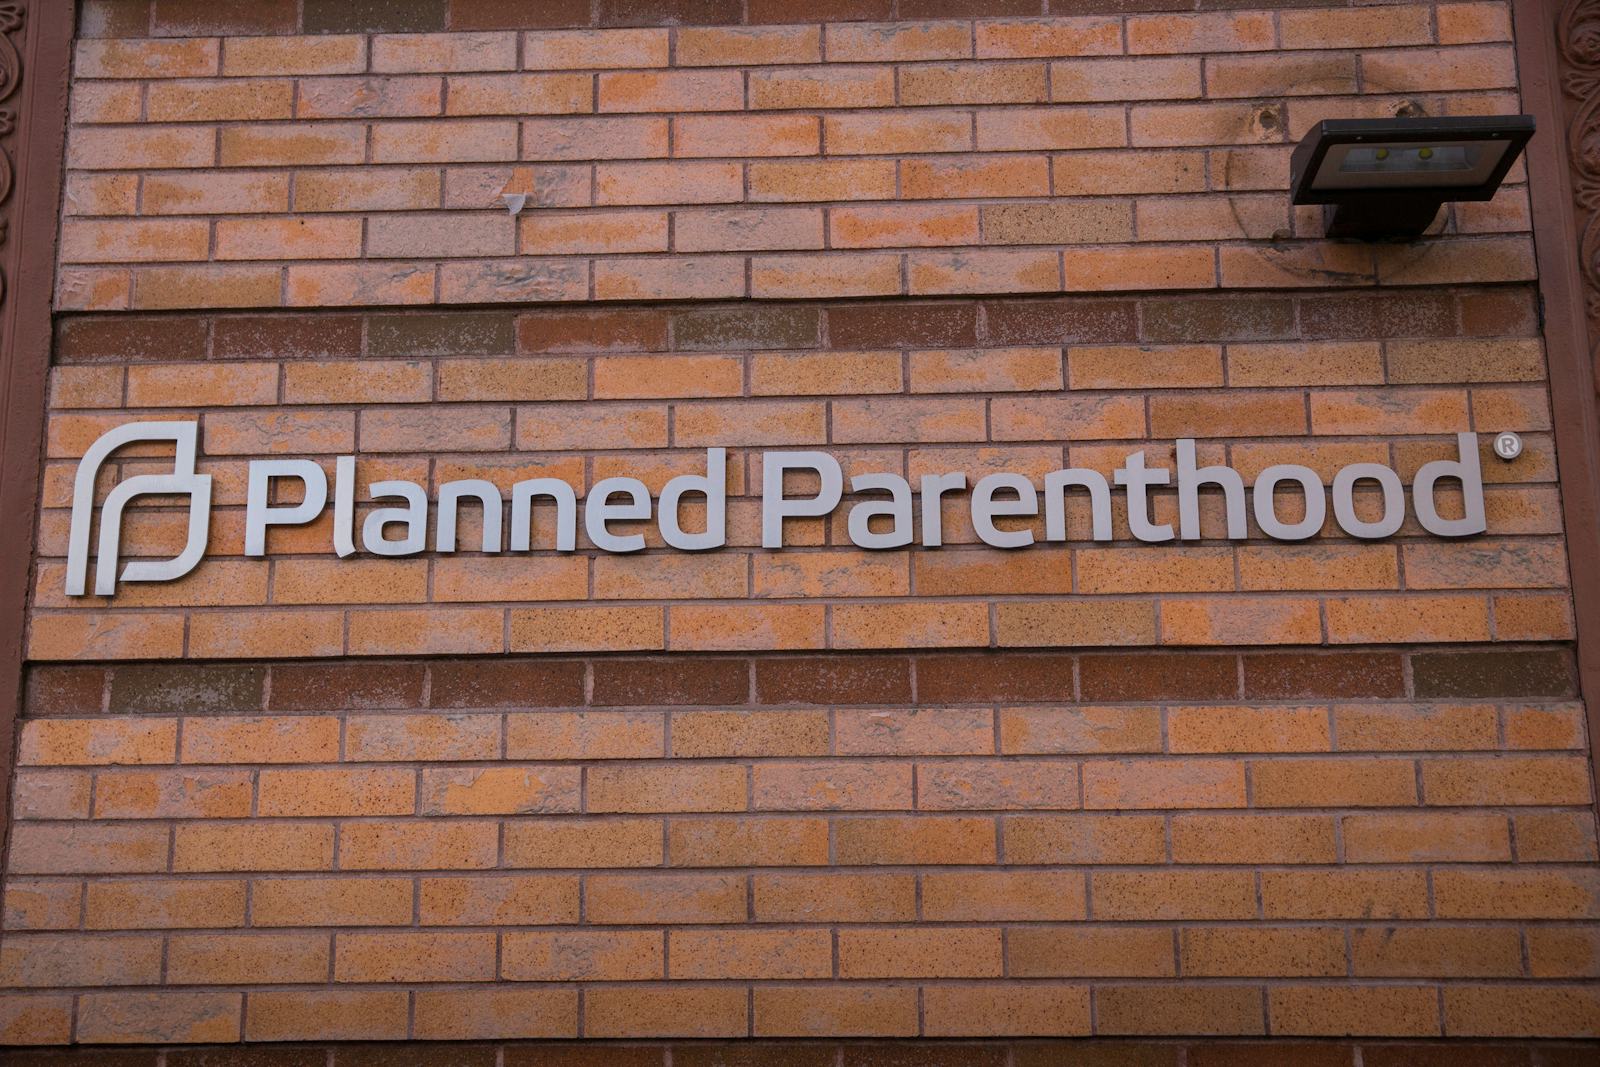 How To Volunteer For Planned Parenthood, Because This Organization May